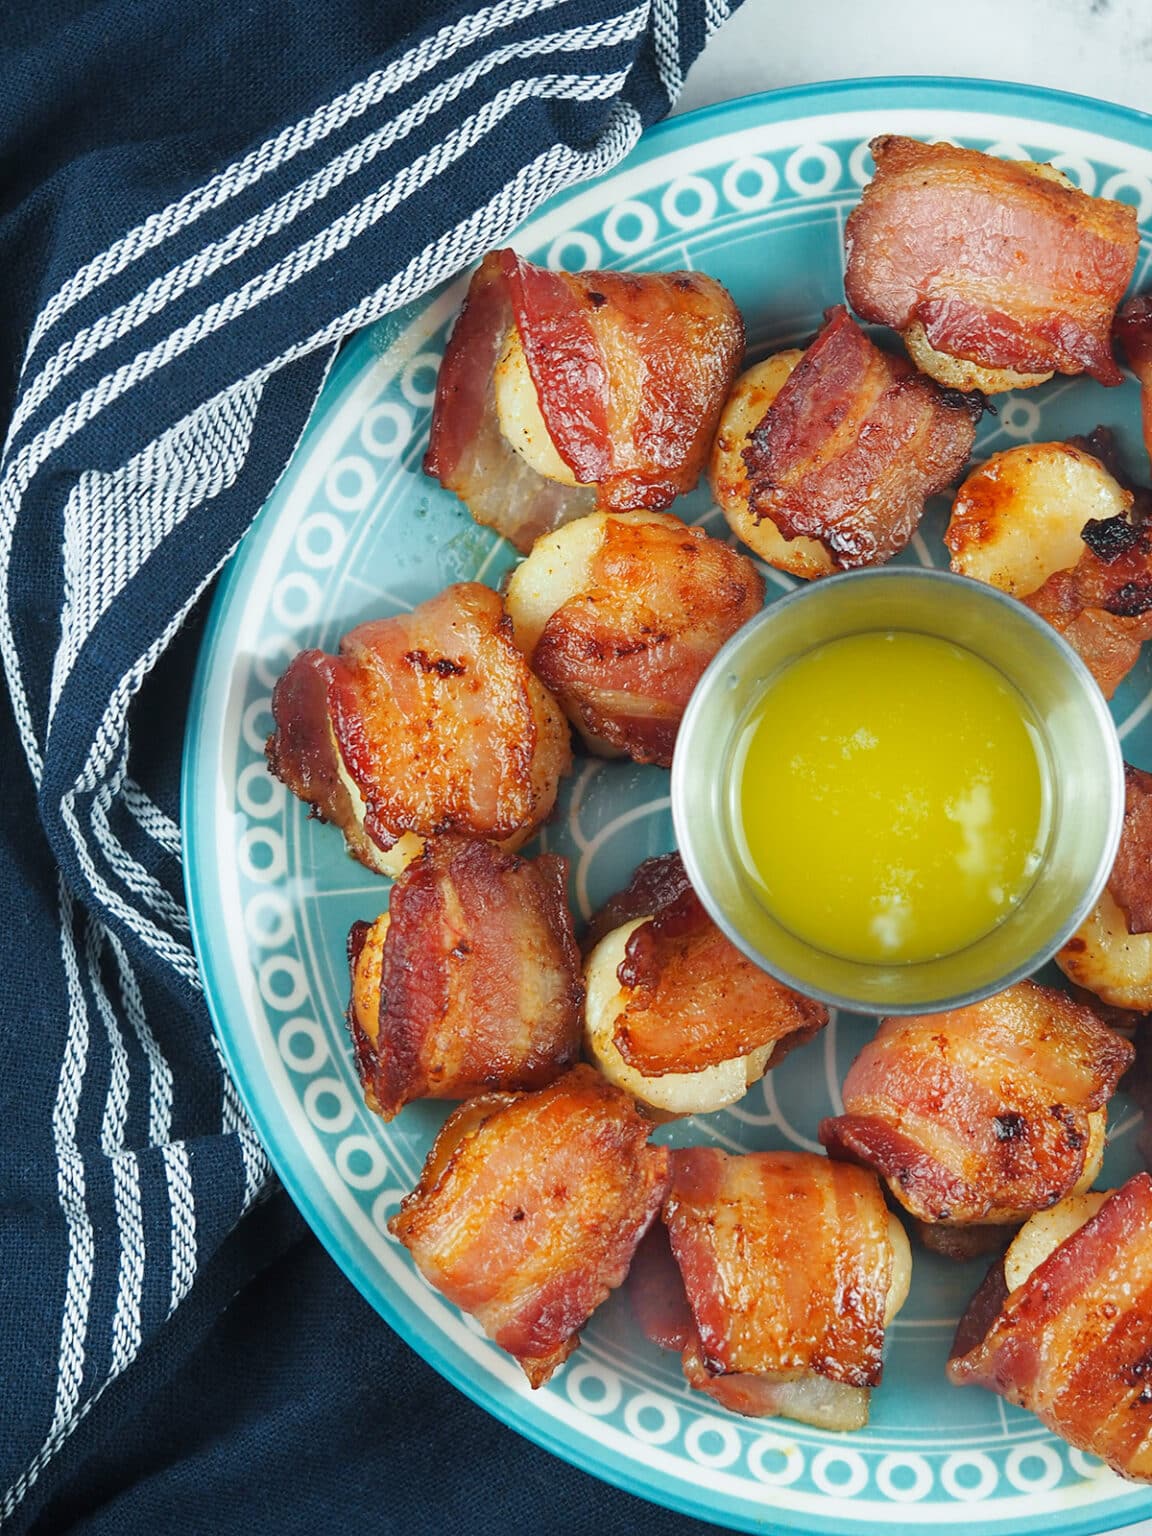 Bacon wrapped scallops on a blue plate.